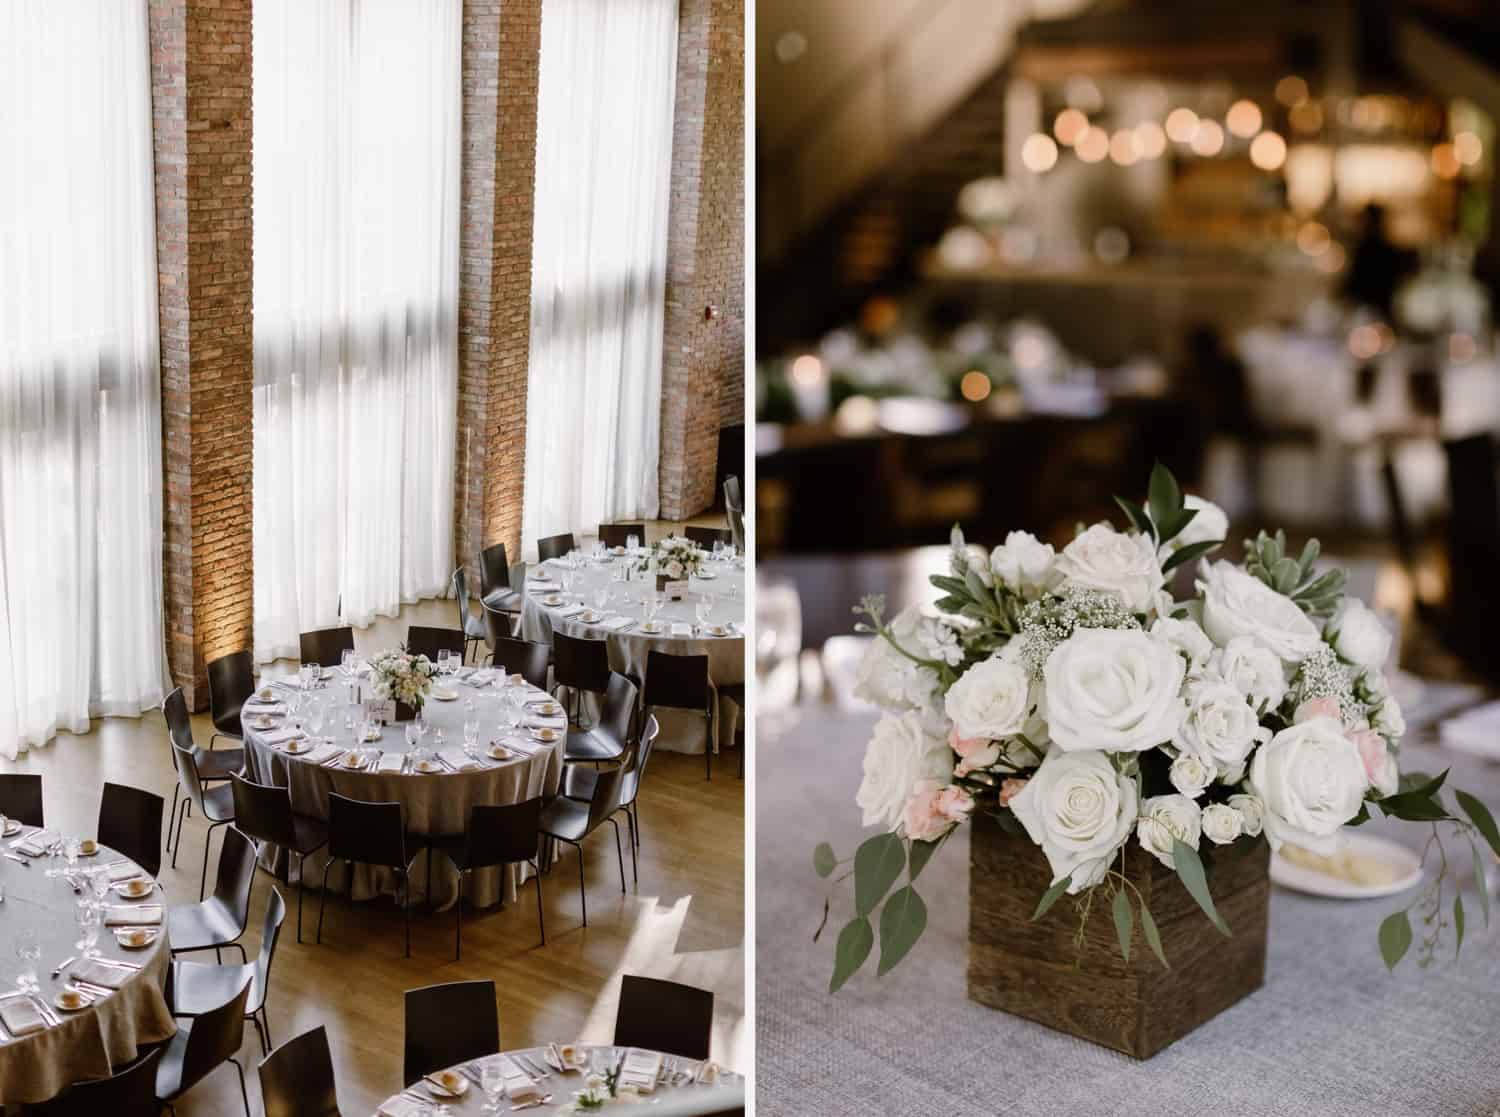 Wedding reception room details, The Roundhouse wedding, Beacon NY